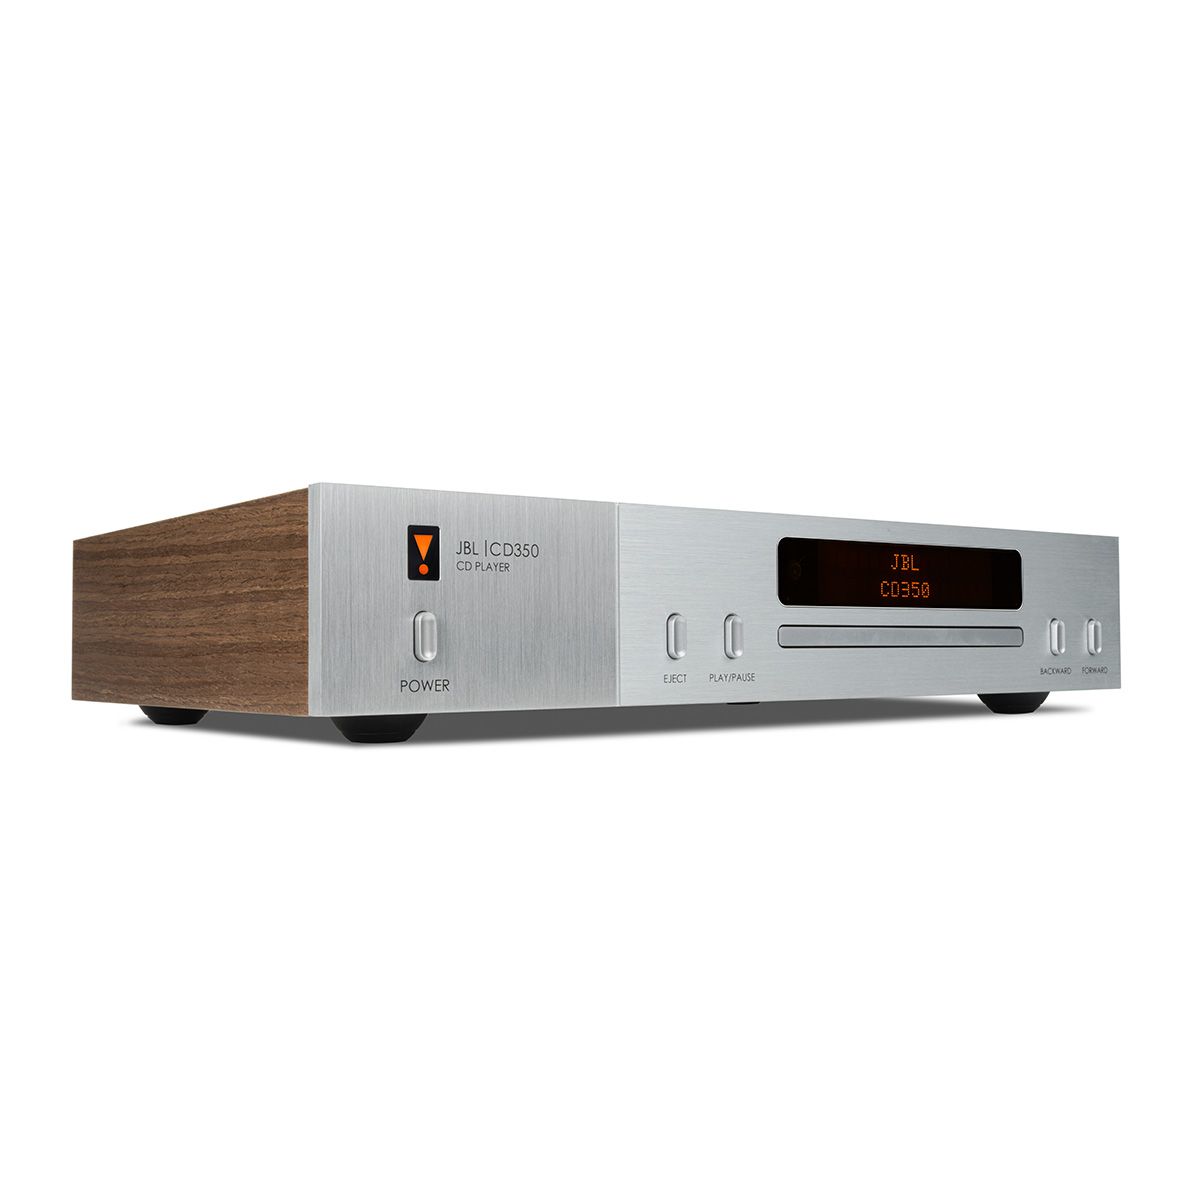 JBL CD350 CD Player - Walnut angled left front view